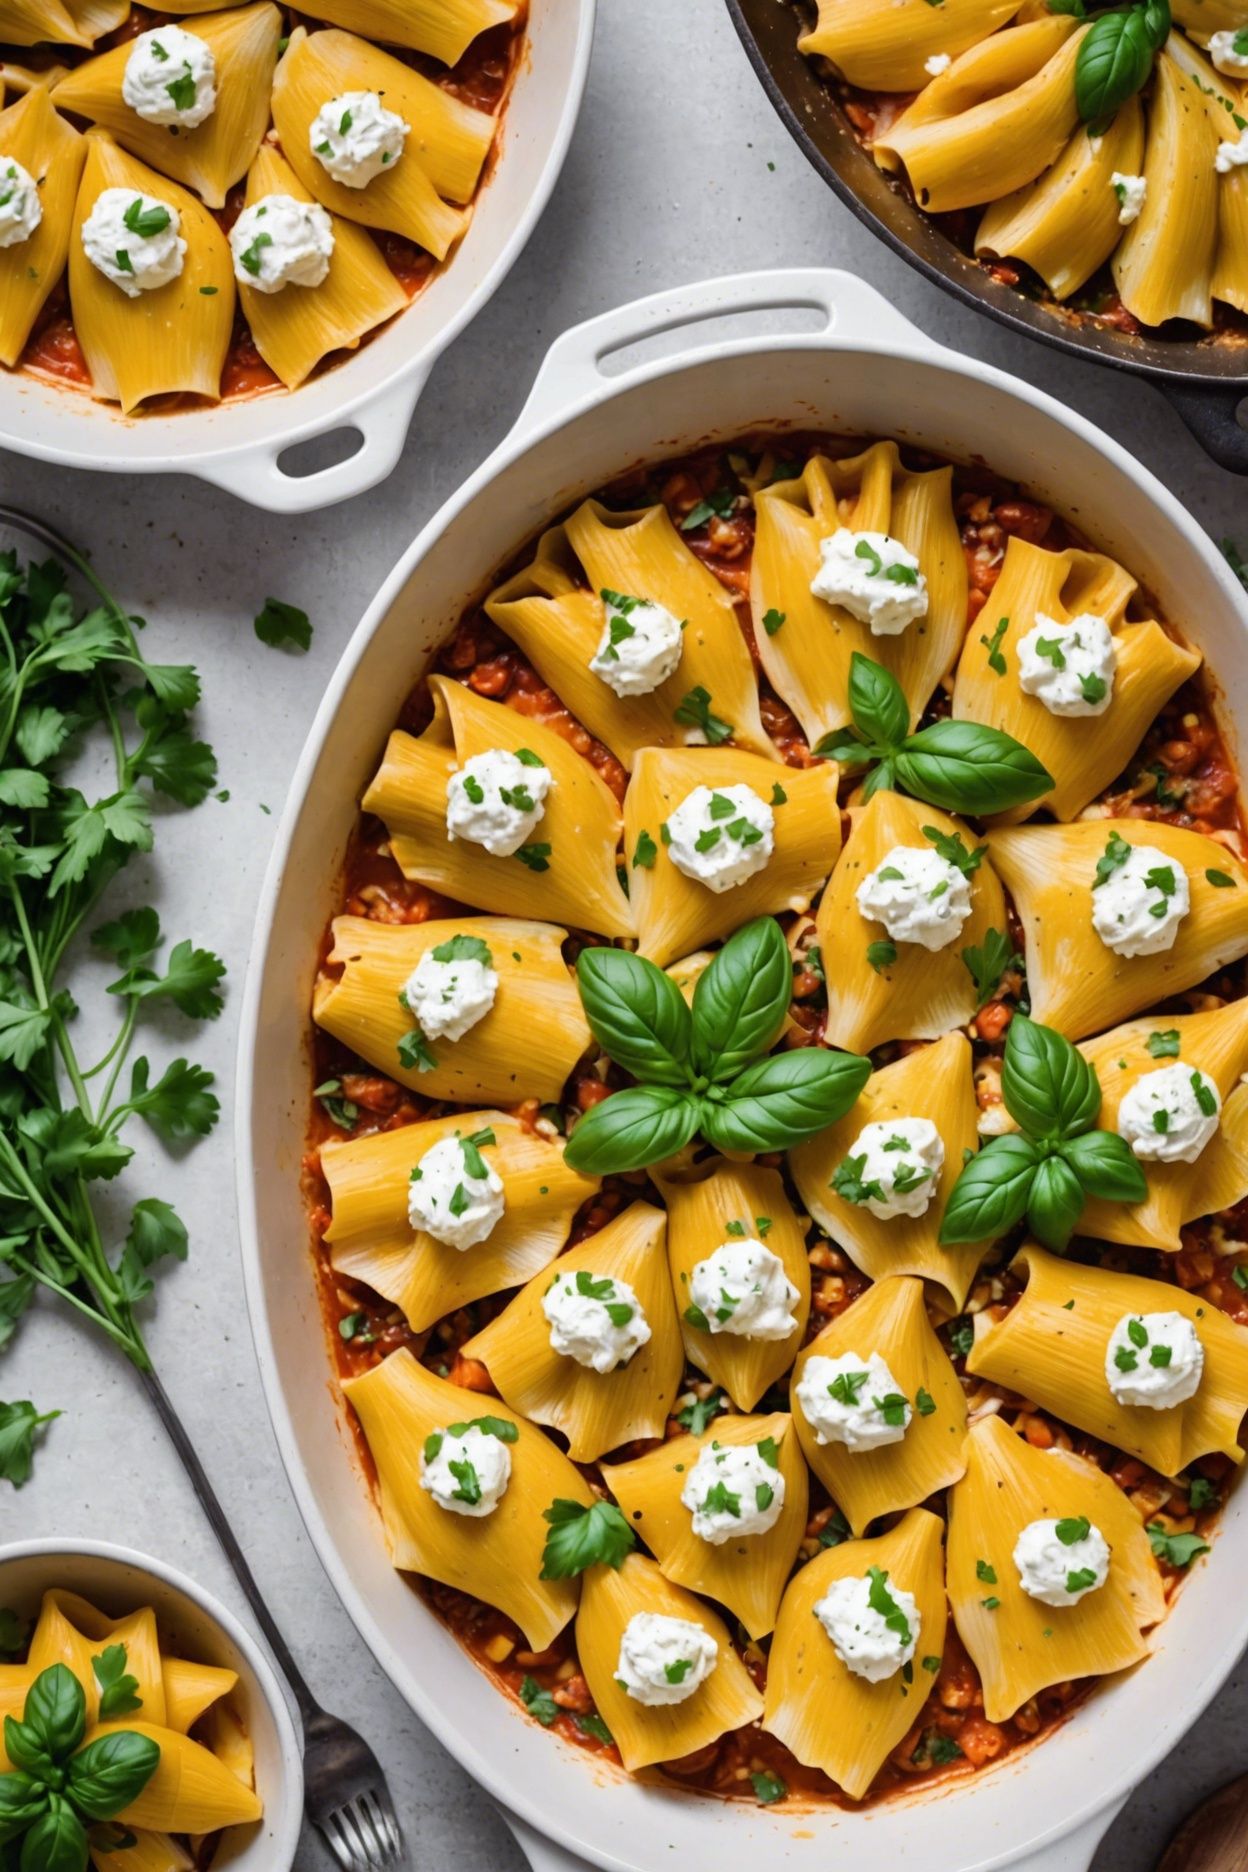 Stuffed Shells With Summer Squash And Ricotta